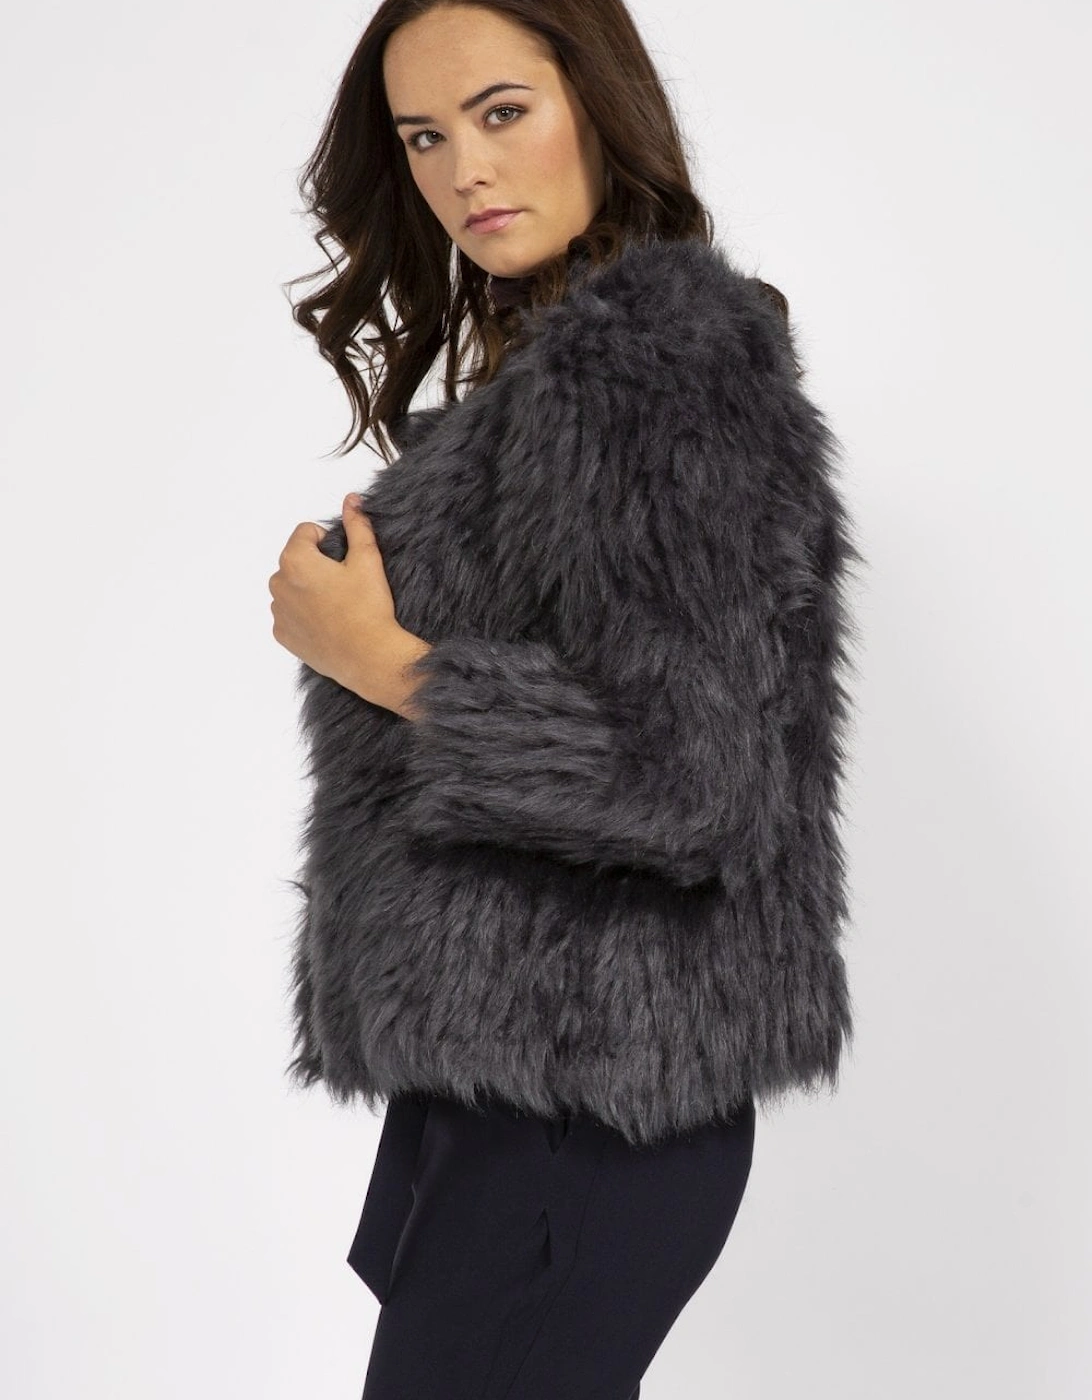 Grey Hand Knitted Faux Fur Jacket